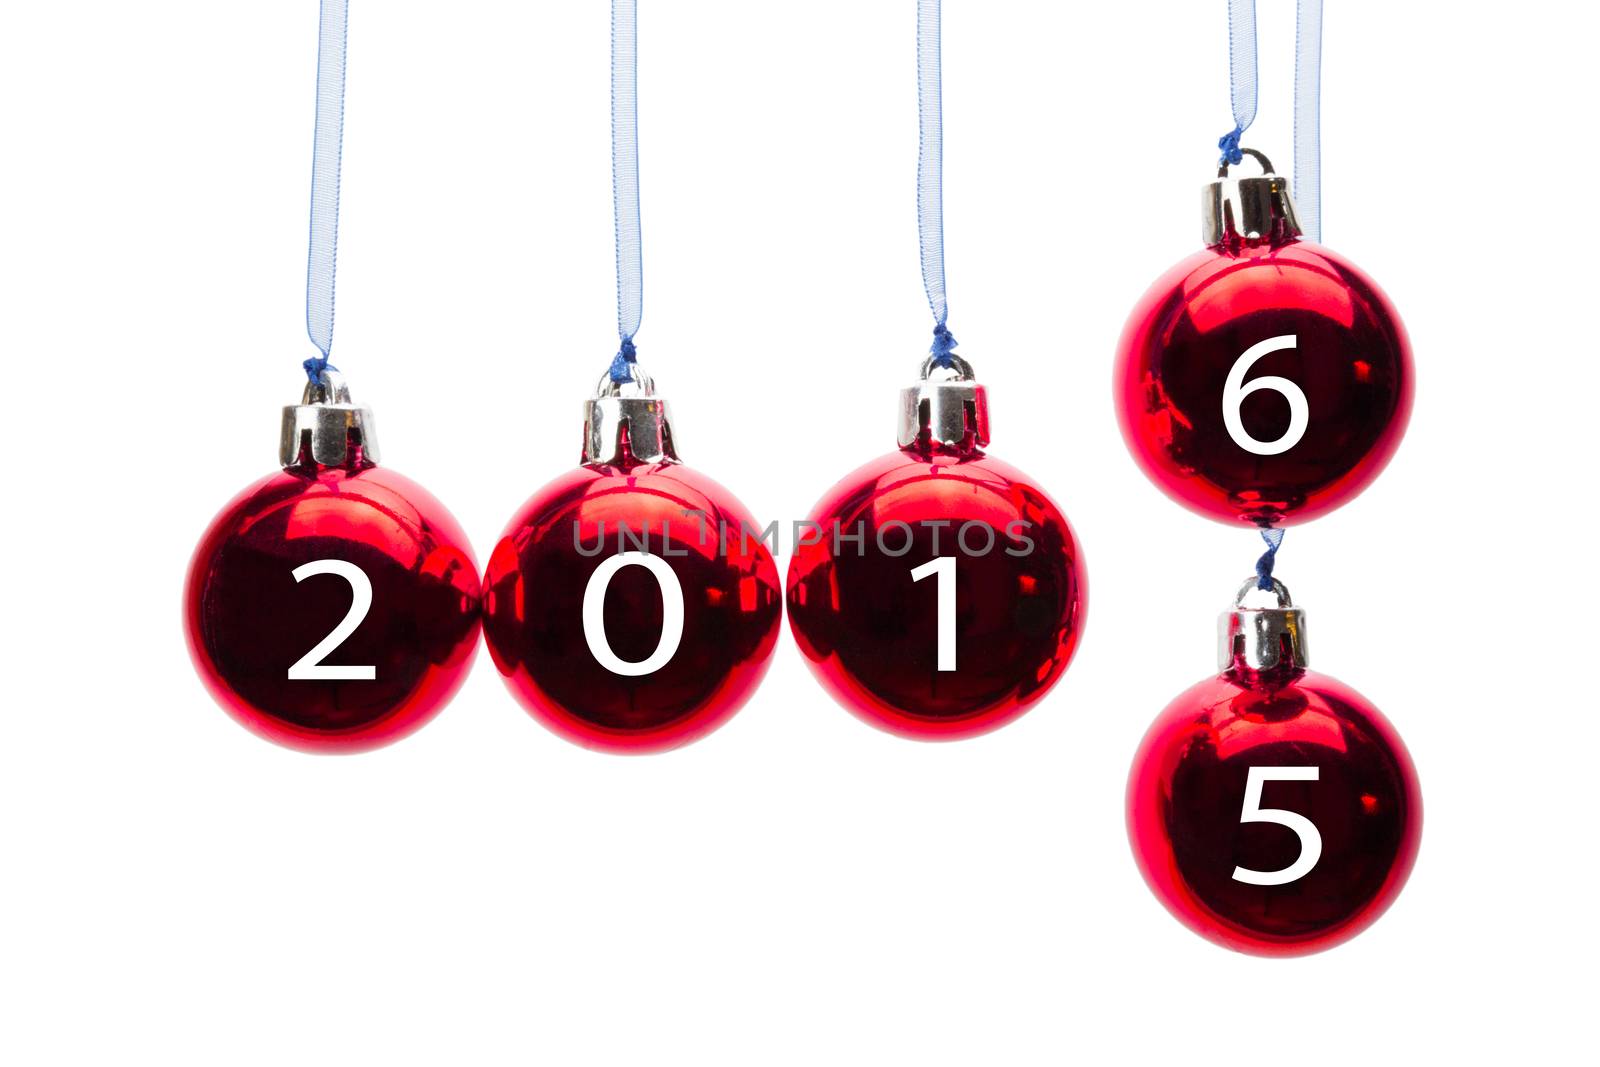 Red christmas balls with numbers of old and new year by BenSchonewille